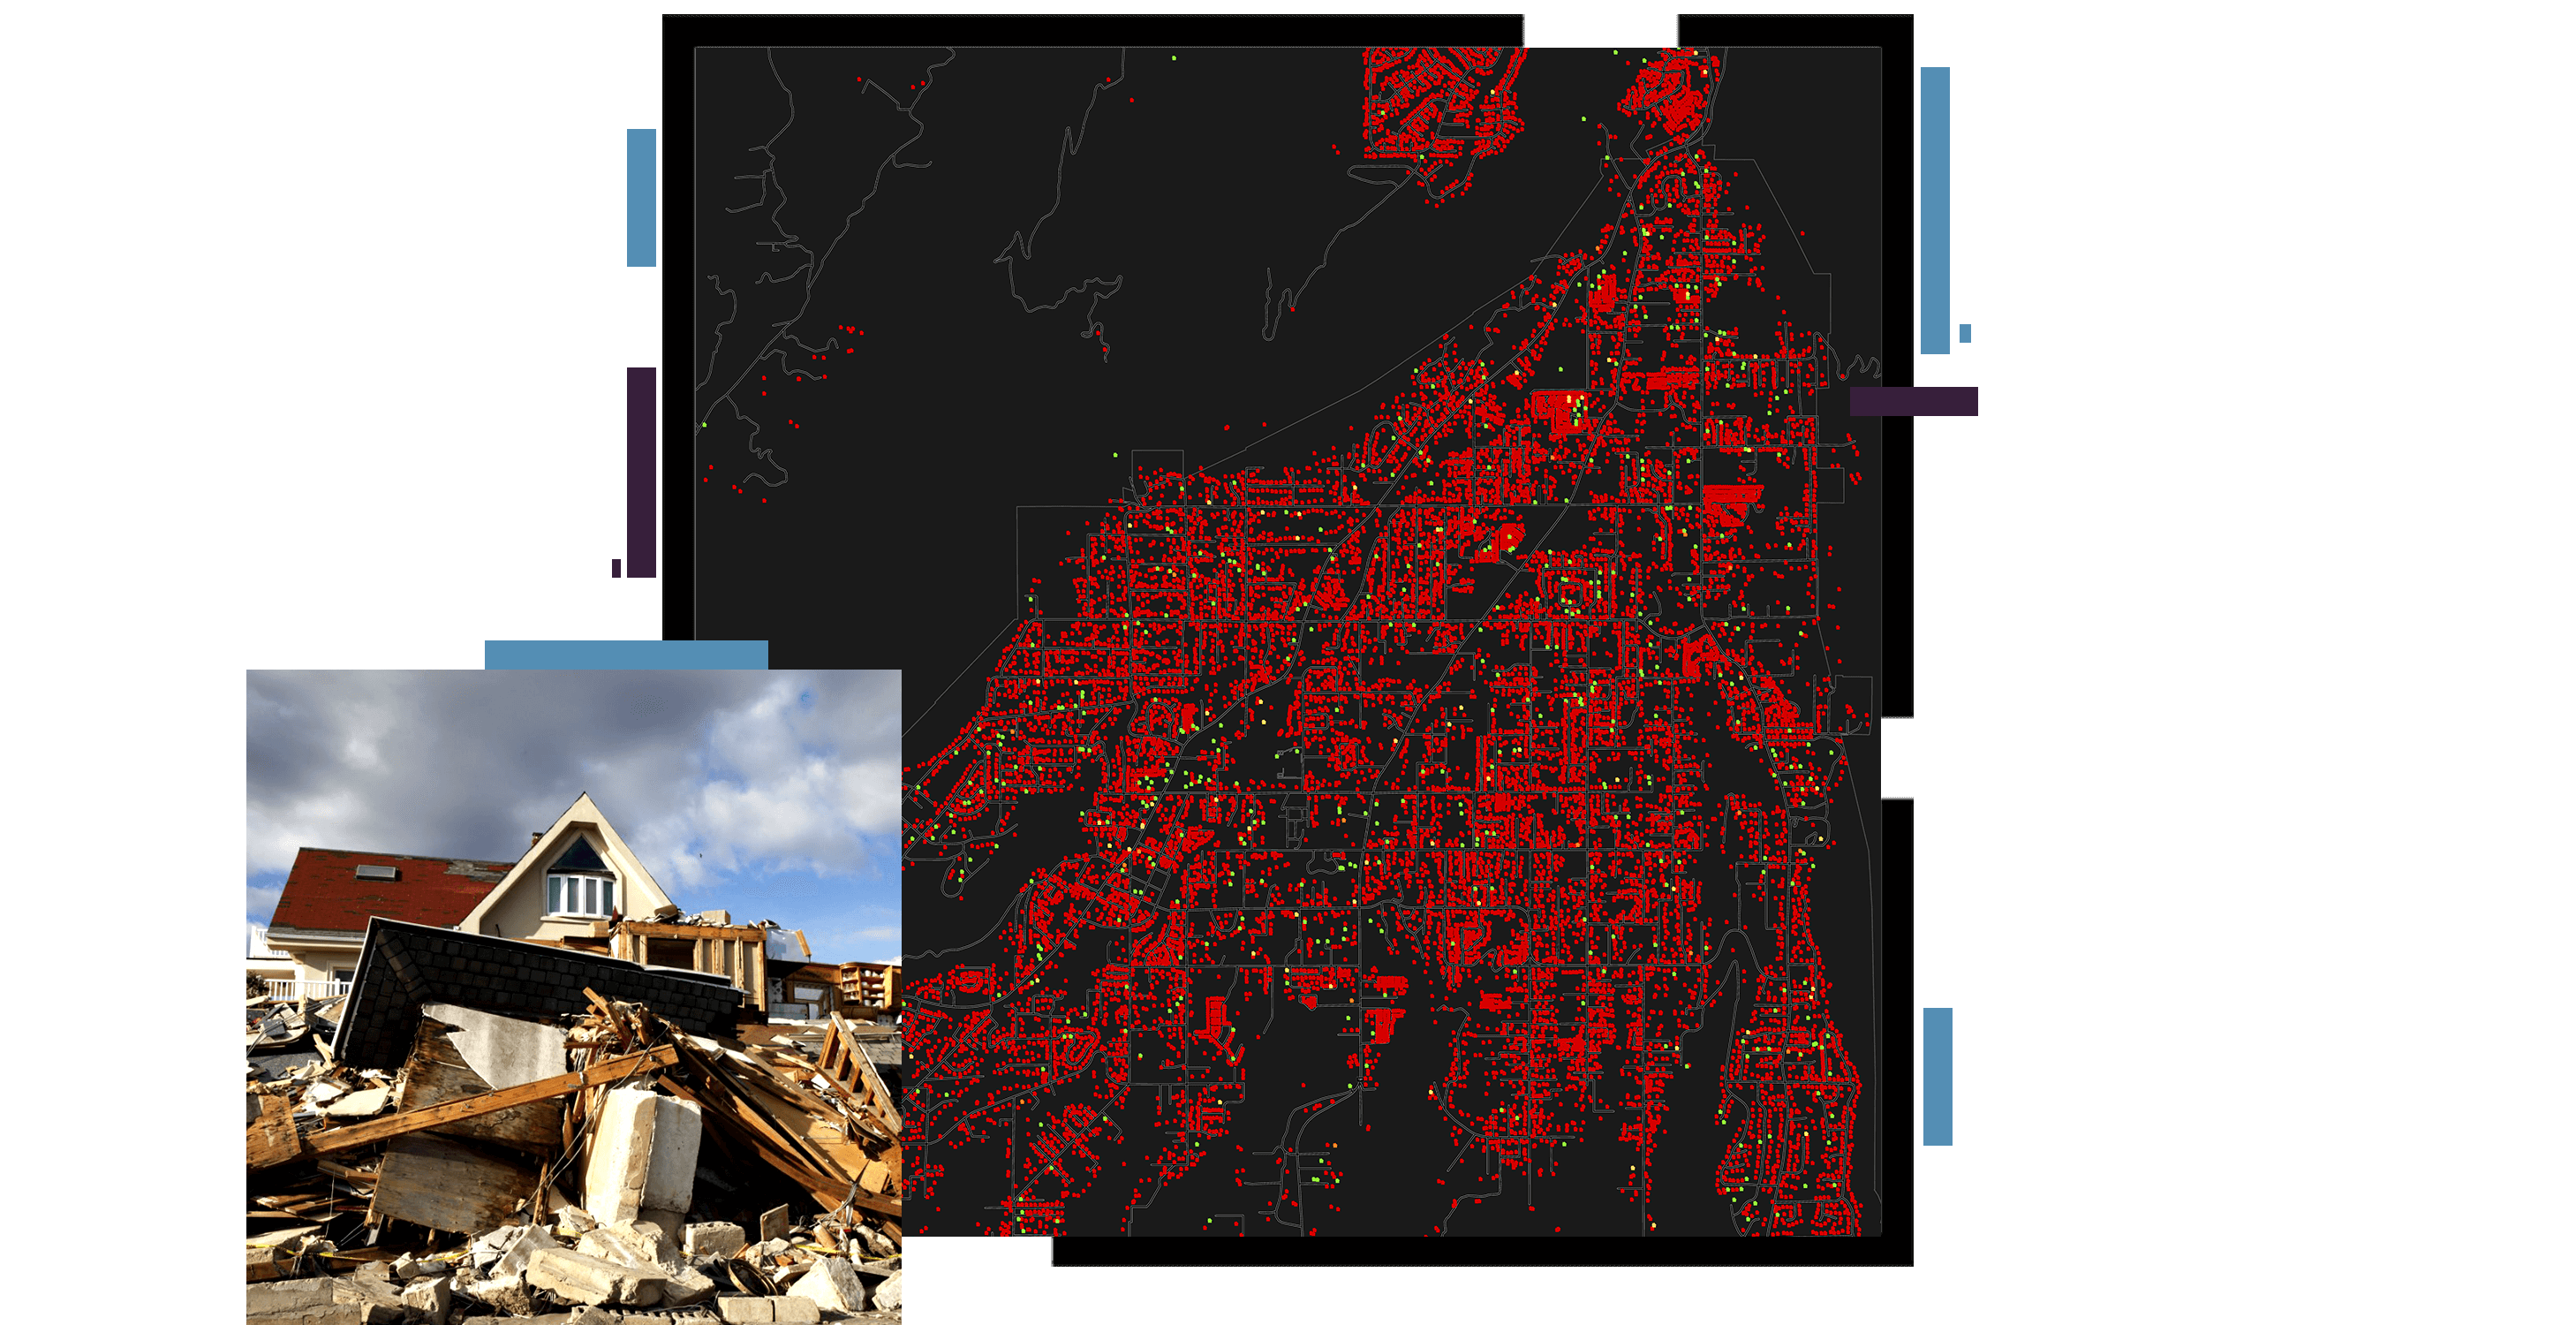 A density map in red and black overlaid with a photo of a house